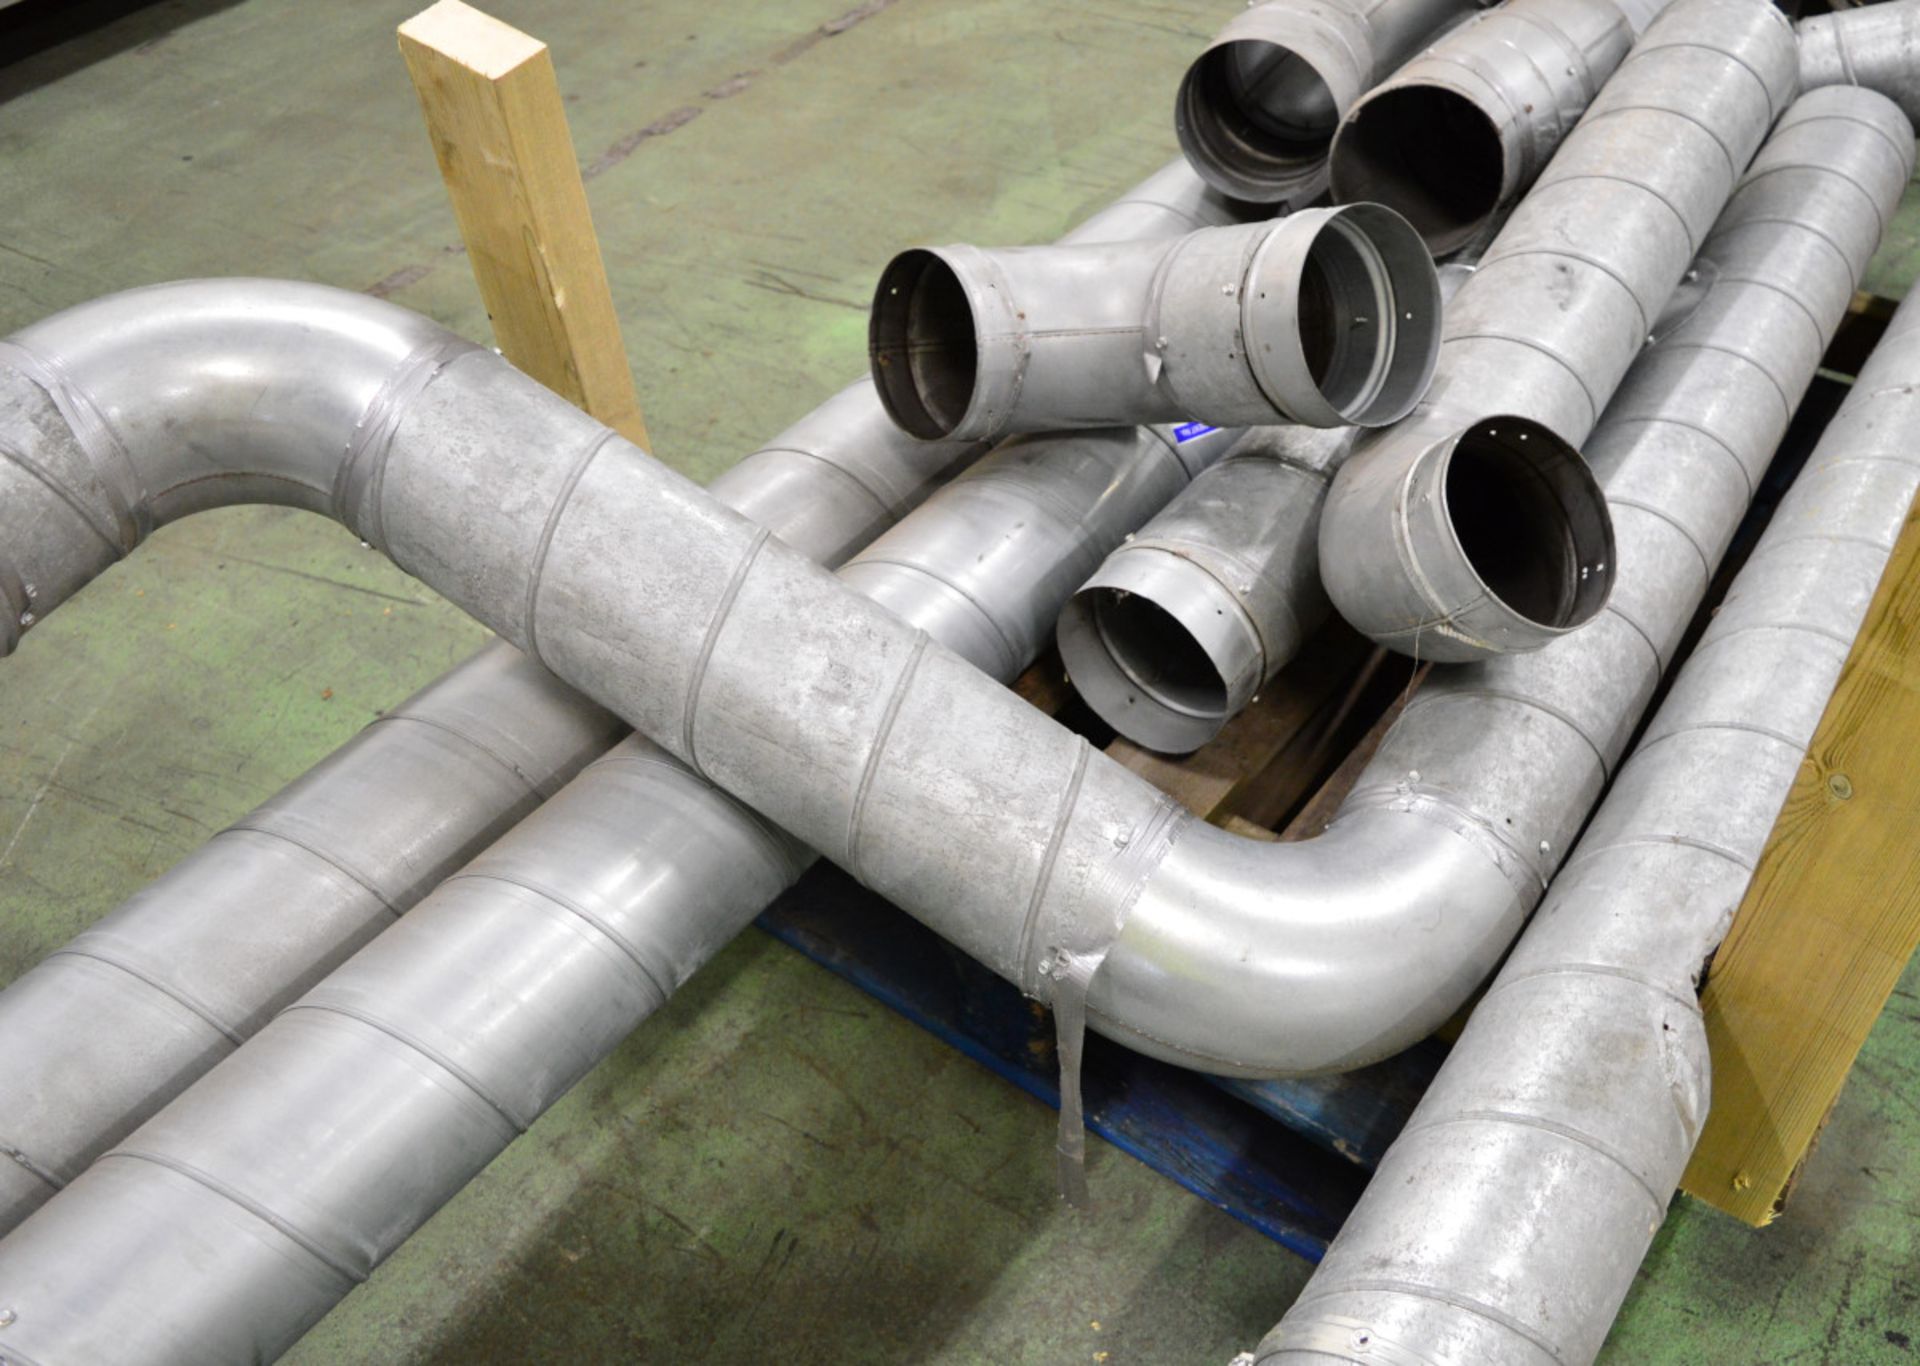 150mm / 6" Spiral Ducting & Fittings. Approx 10m Total. - Image 3 of 3